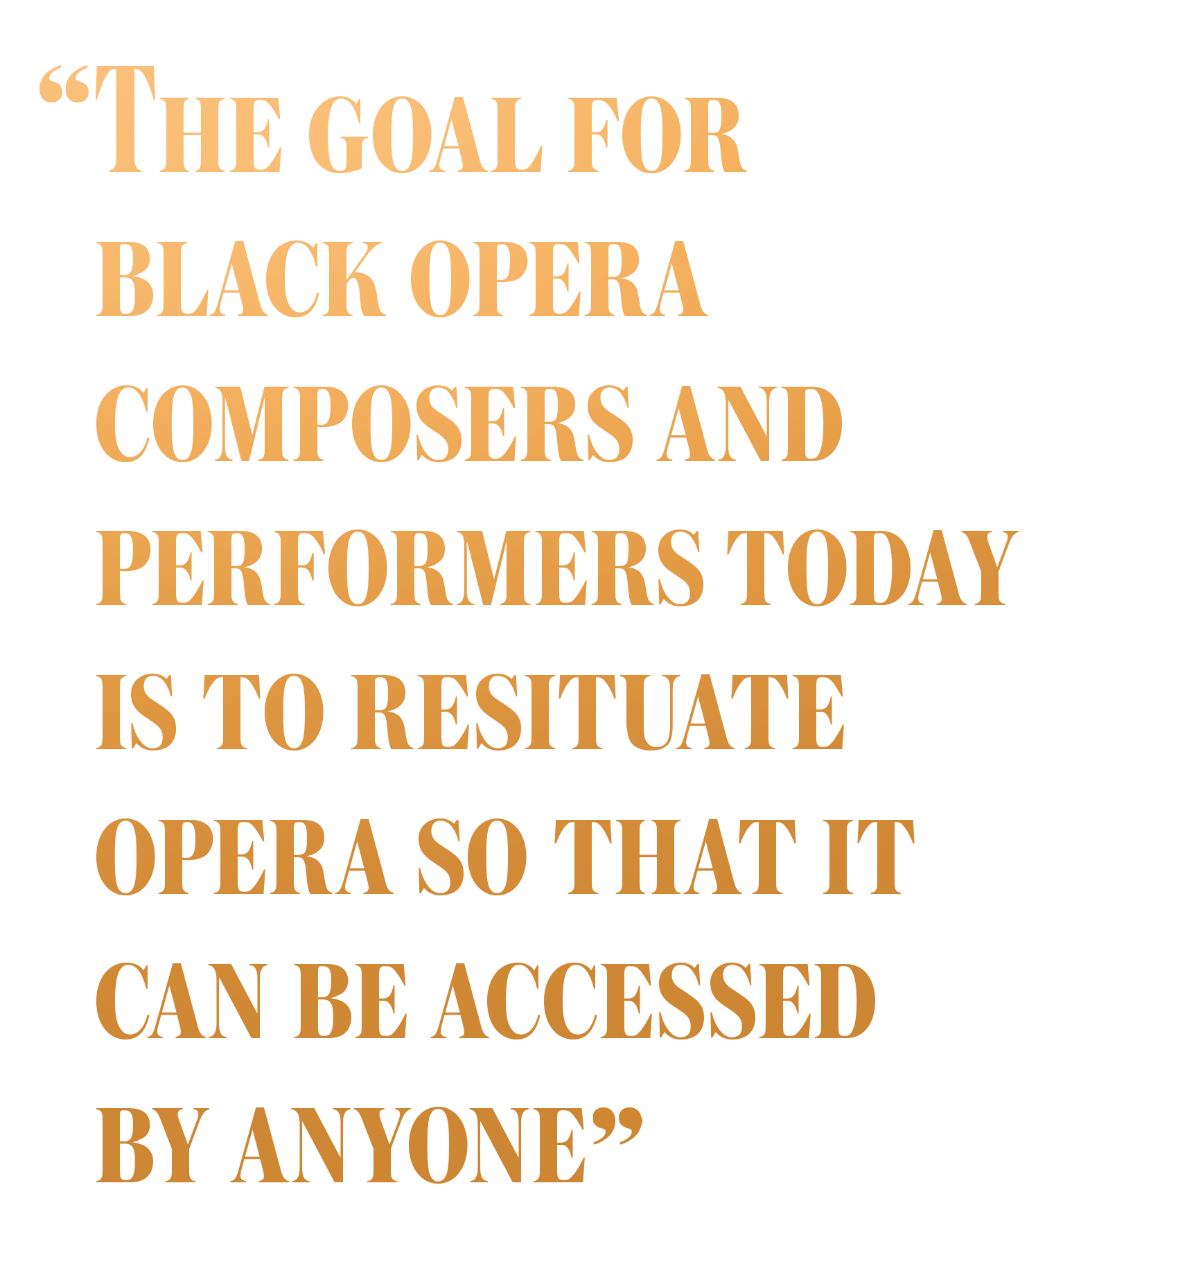 The goal for black opera composers and performers today is to resituate opera so that it can be accessed by anyone.